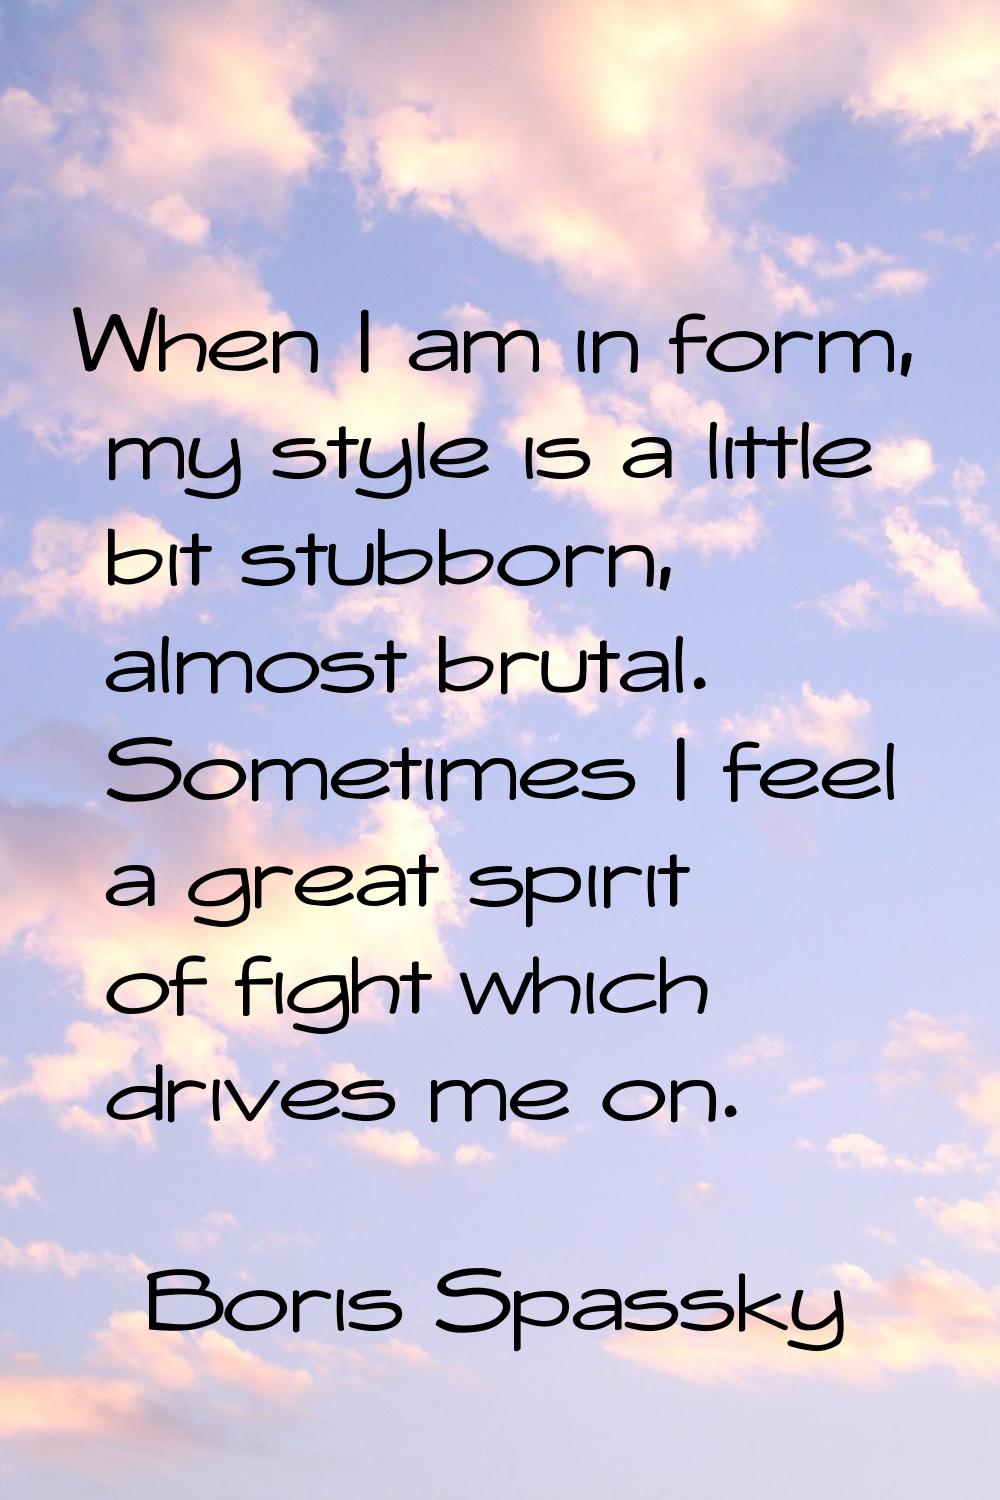 When I am in form, my style is a little bit stubborn, almost brutal. Sometimes I feel a great spiri